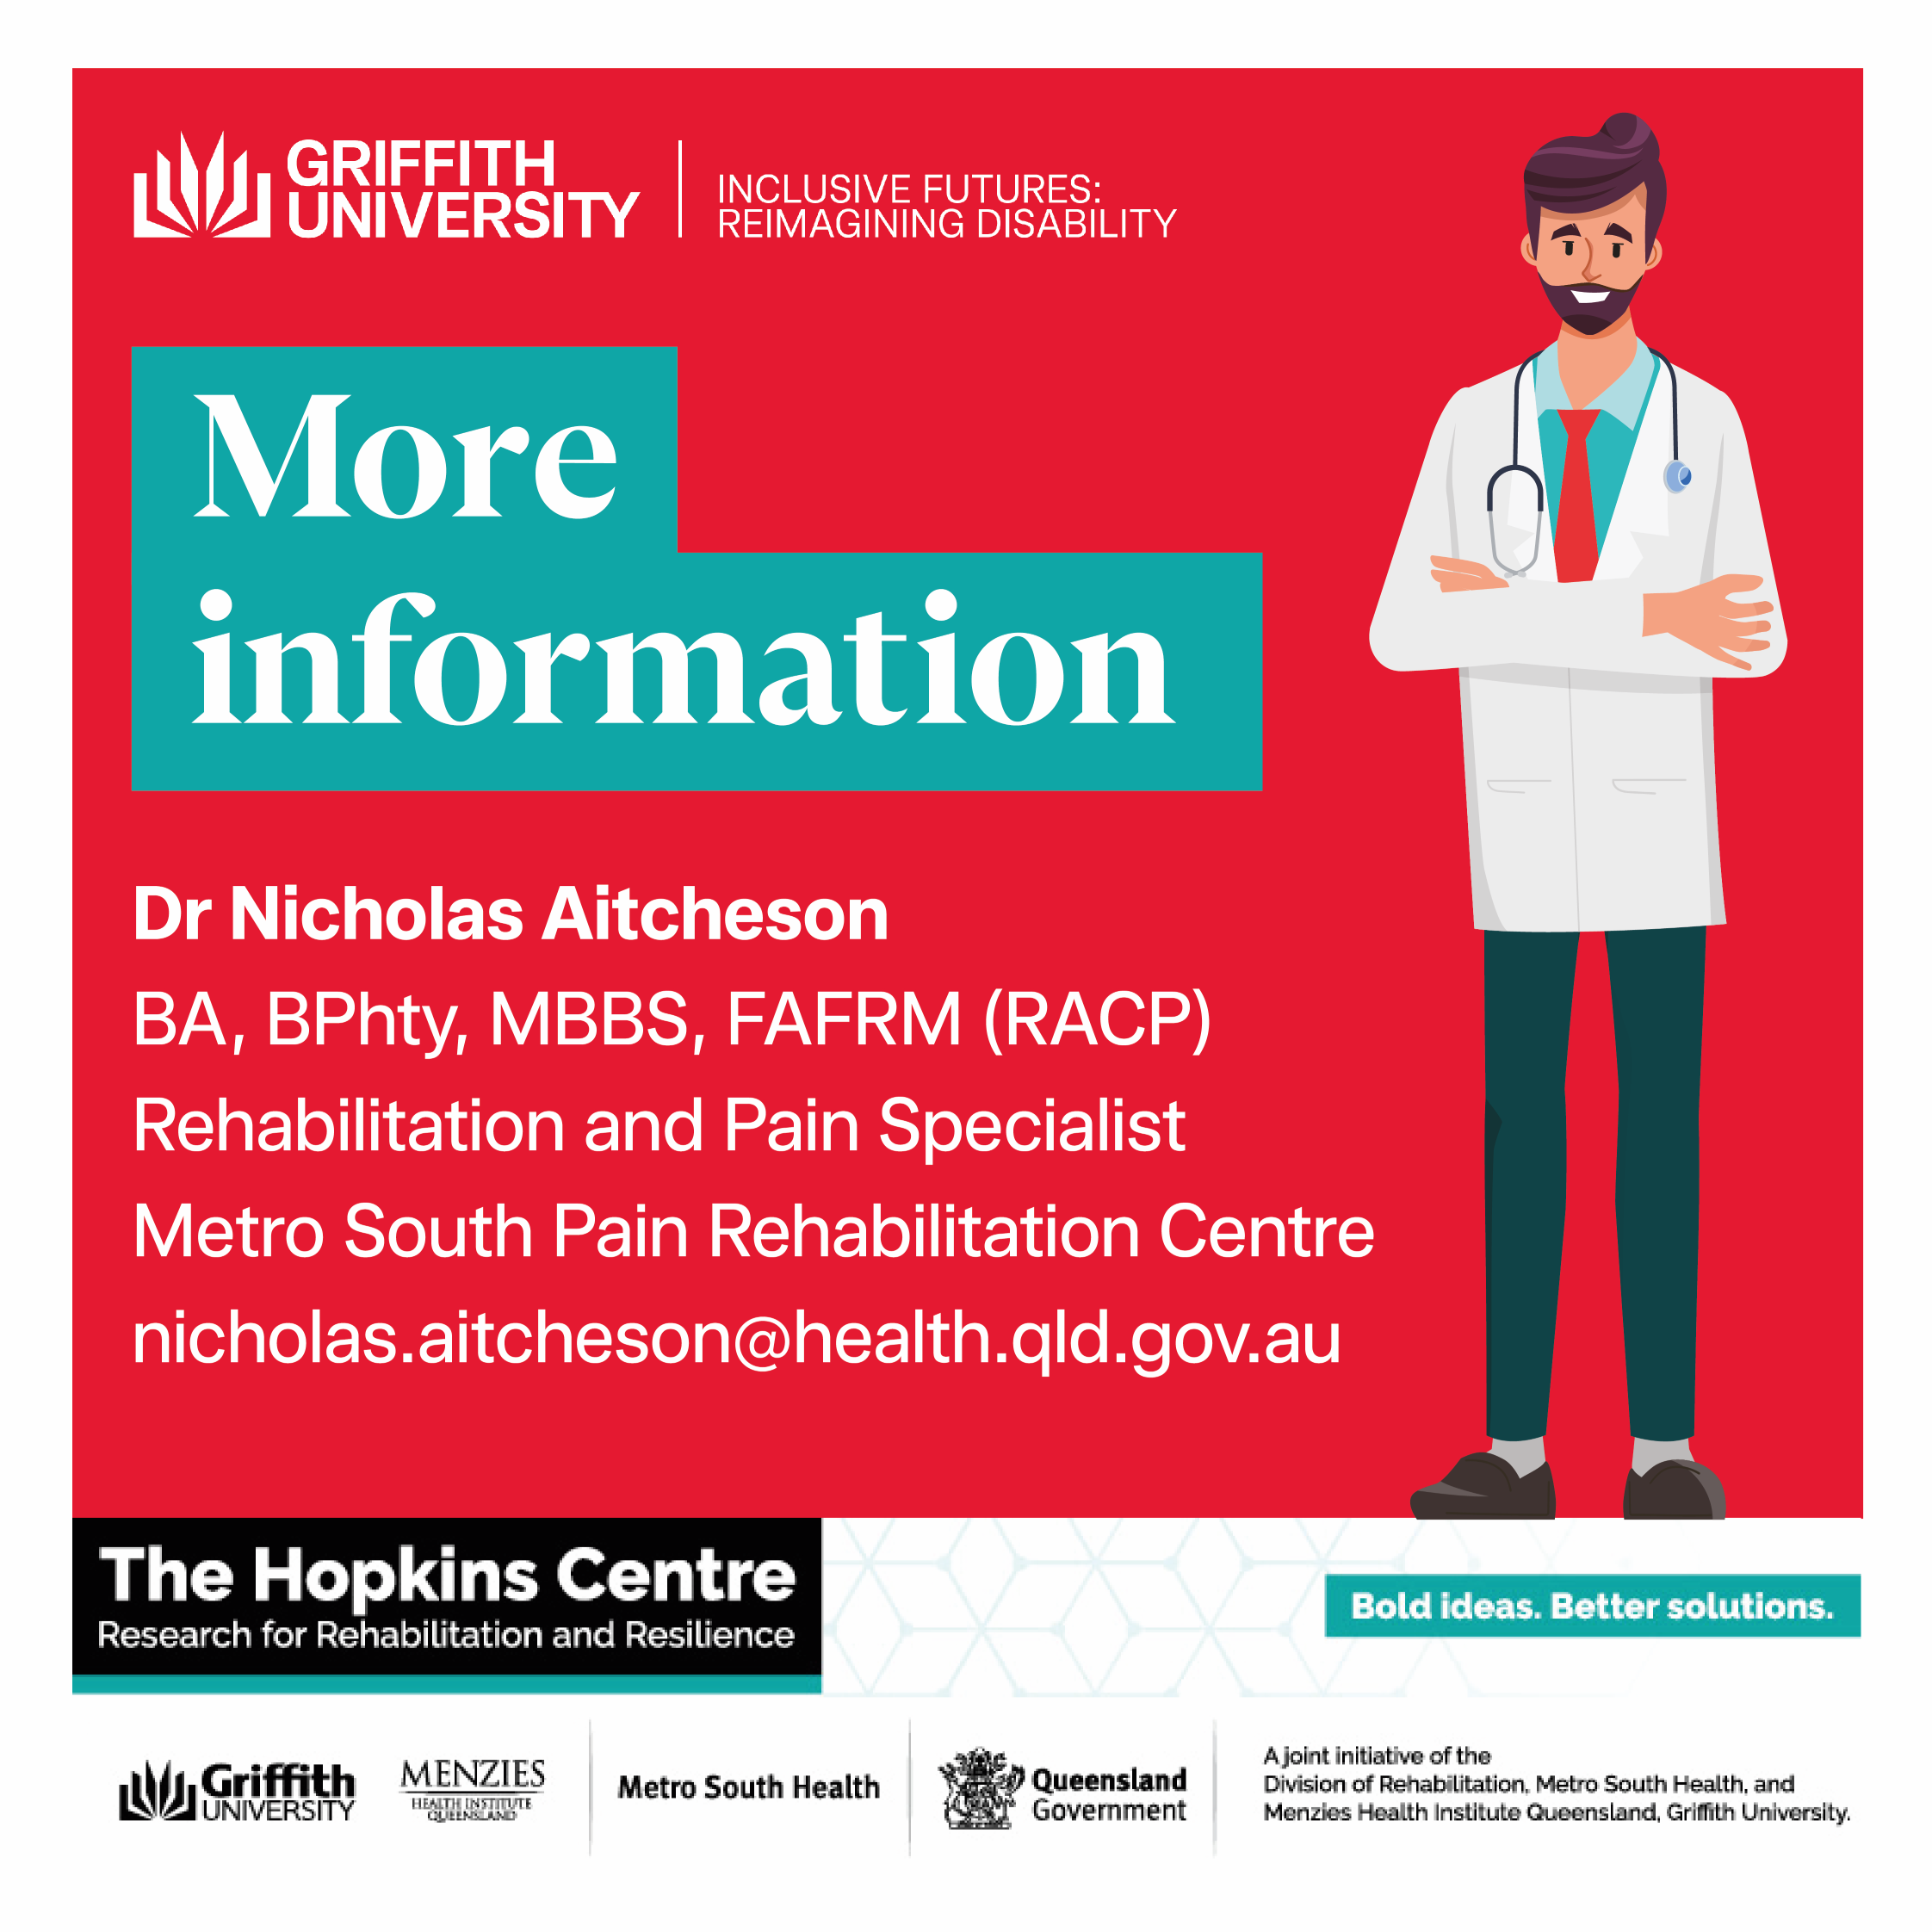 Infographic tile for National Pain Week 24 to 30 July, including a vector graphic of a doctor wearing medical white shirt, stethoscope around his neck and arms crossed.  Text is the same as in the More Information details. The bottom of the tile features the Griffith University Inclusive Futures: Reimagining Disability Logo at the bottom The Hopkins Centre lockup featuring the logos Griffith University, Menzies, Metro Health South, Queensland Government and the tagline Bold ideas. Better solutions.